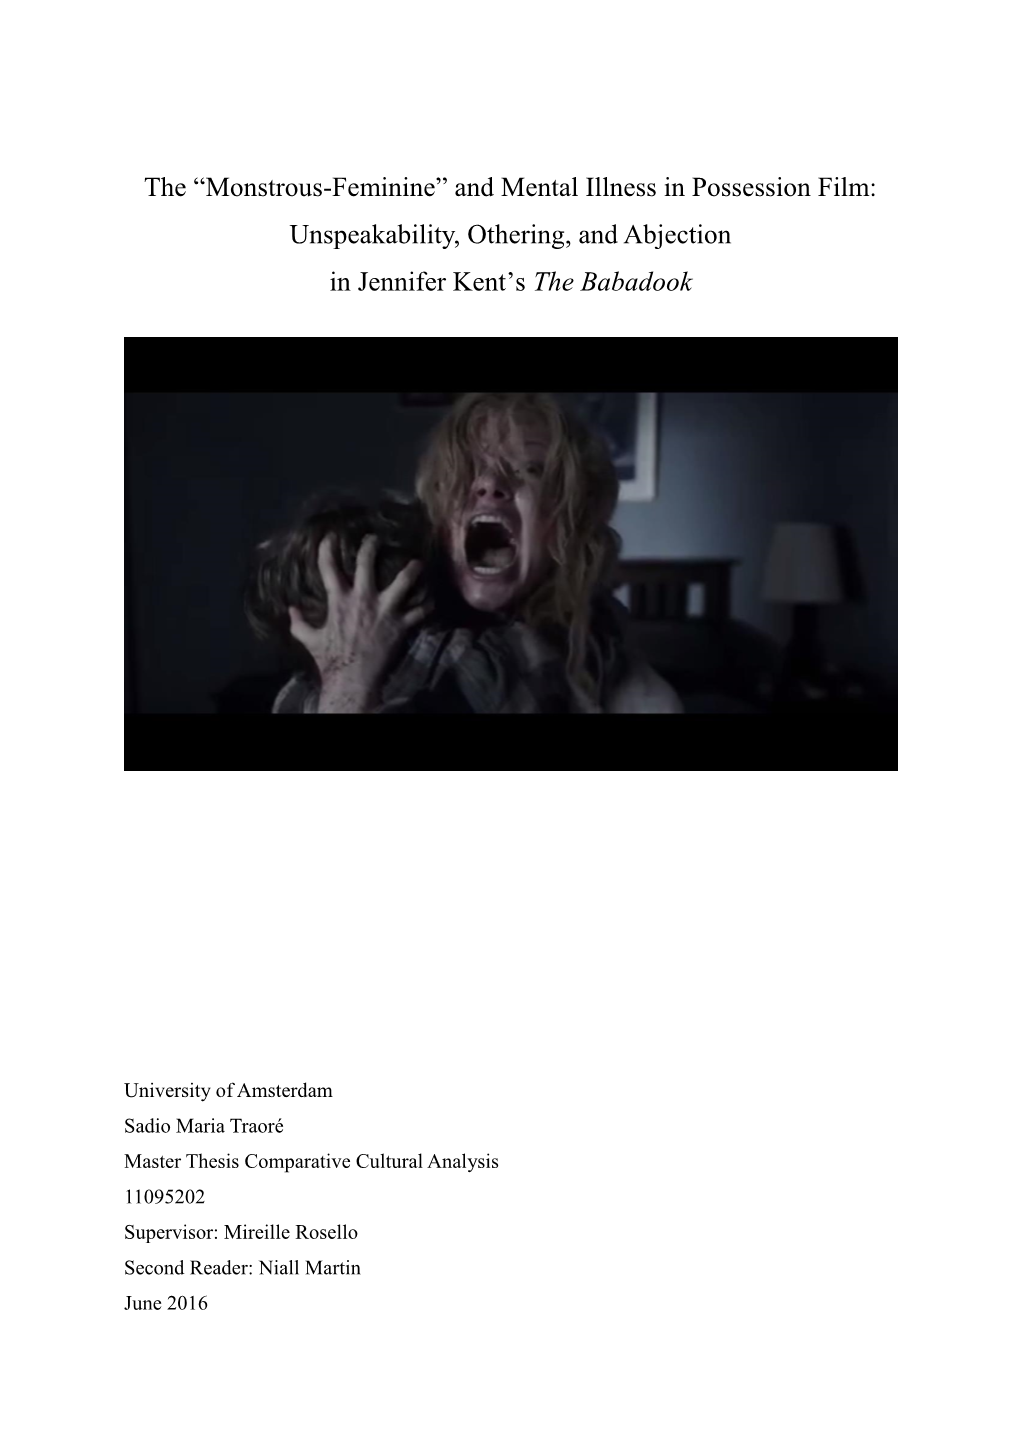 Monstrous-Feminine” and Mental Illness in Possession Film: Unspeakability, Othering, and Abjection